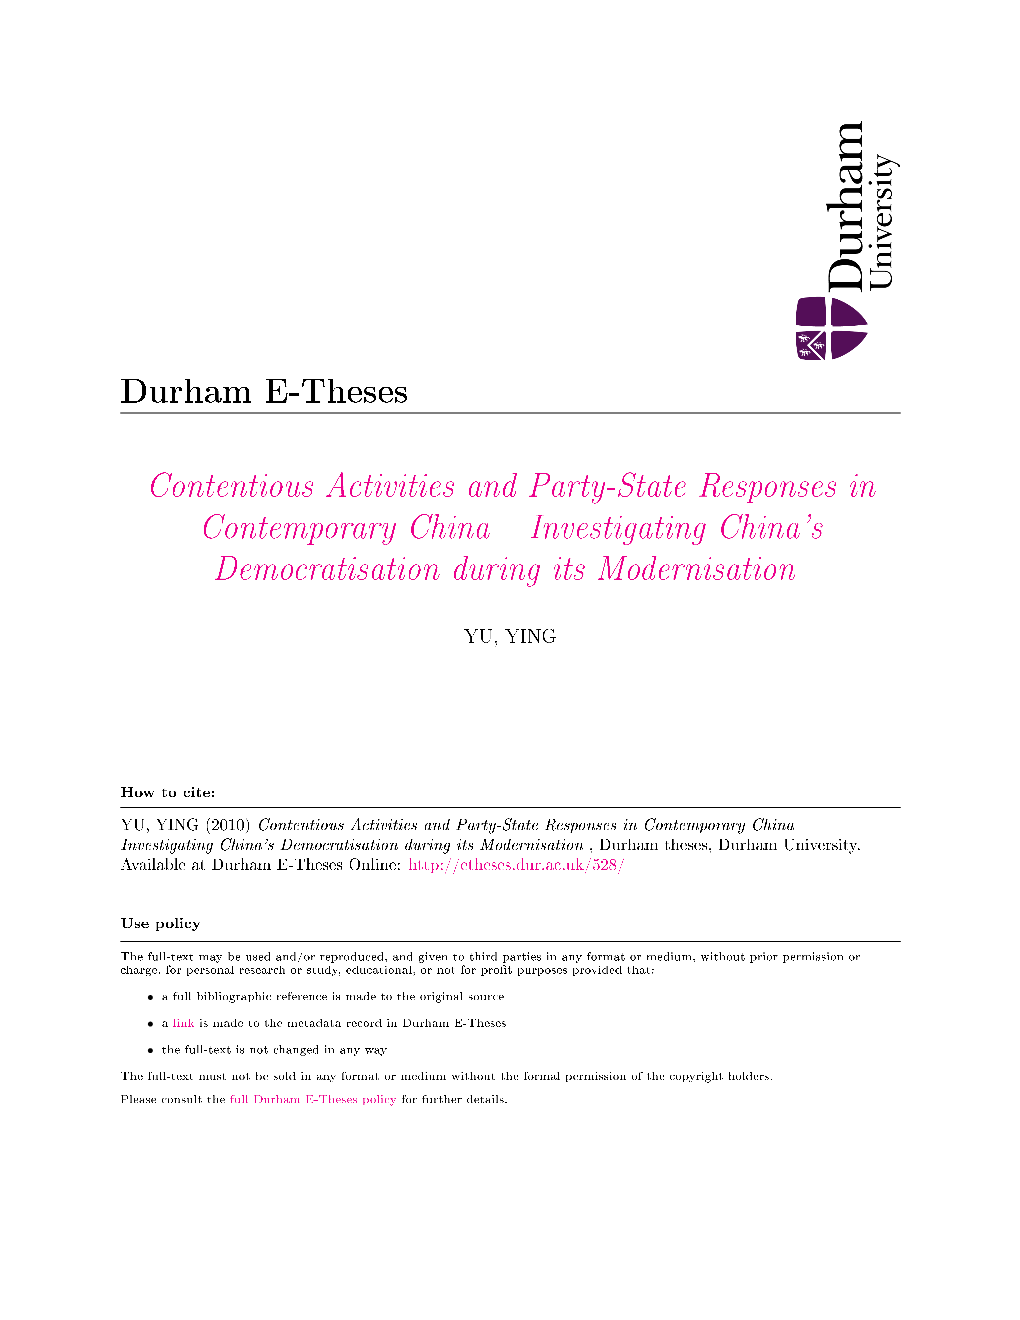 Contentious Activities and Party-State Responses in Contemporary China  Investigating China's Democratisation During Its Modernisation